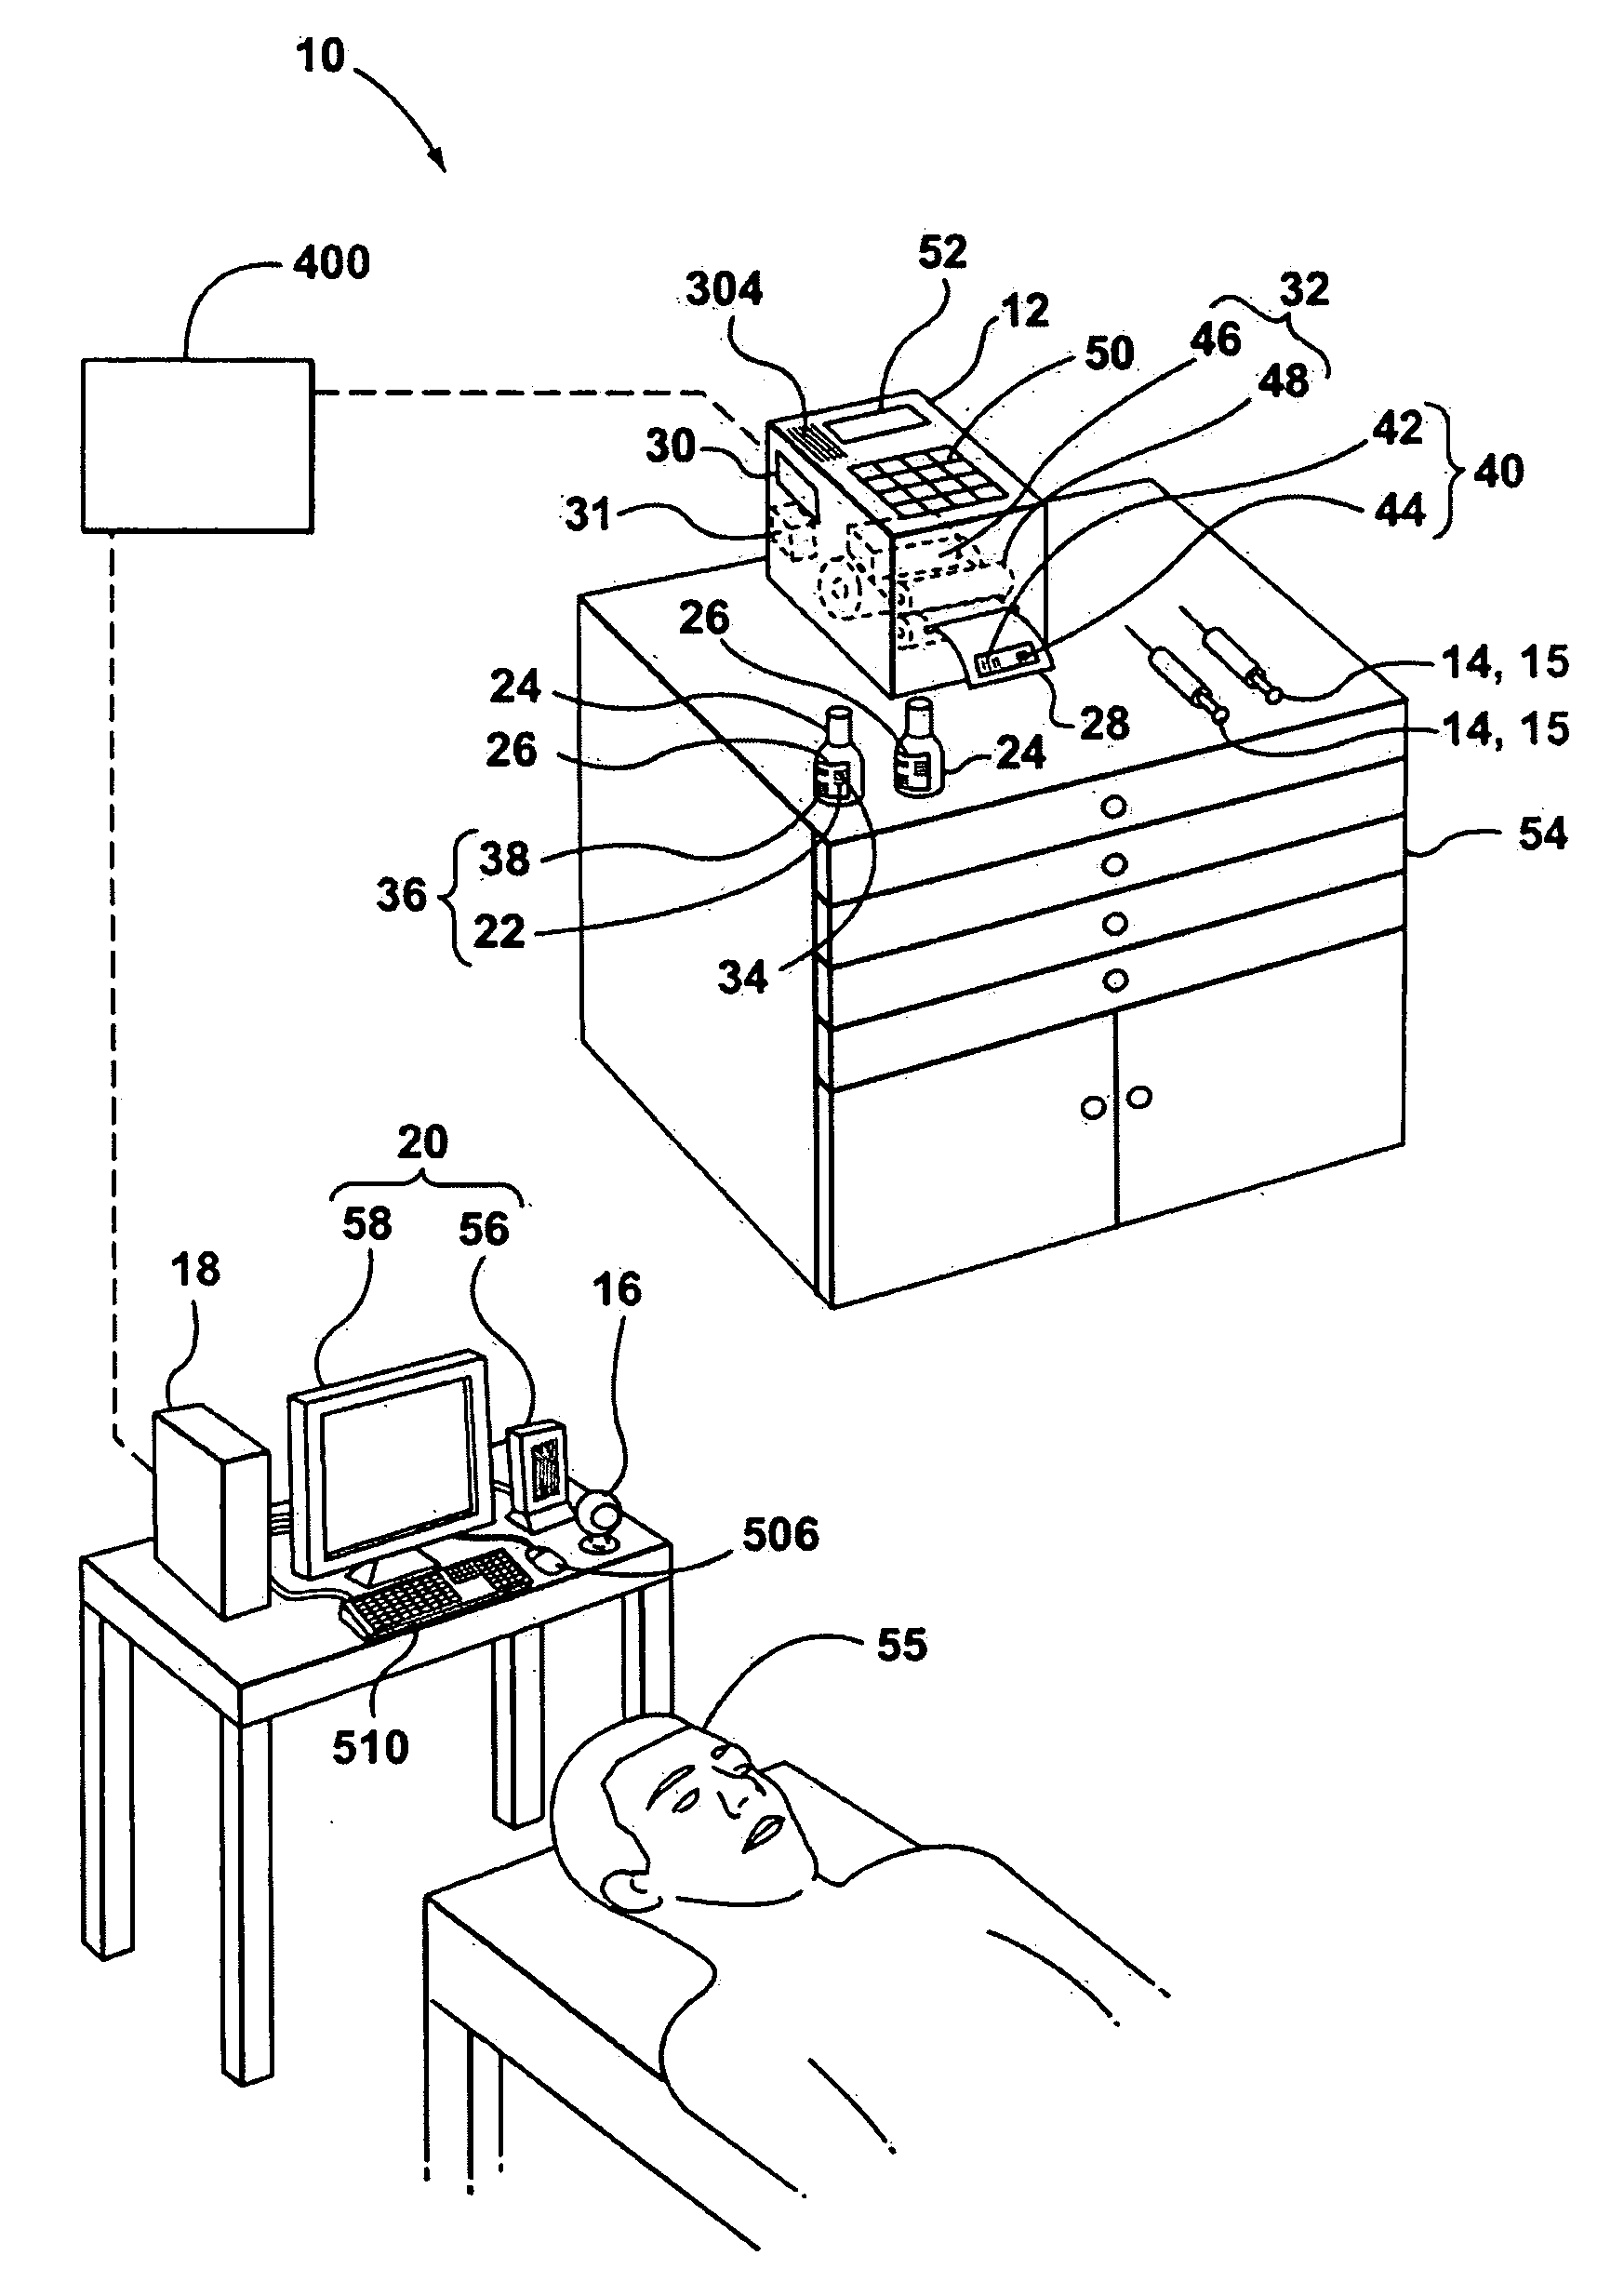 Apparatus, system and method for tracking drugs during a repackaging and administering process